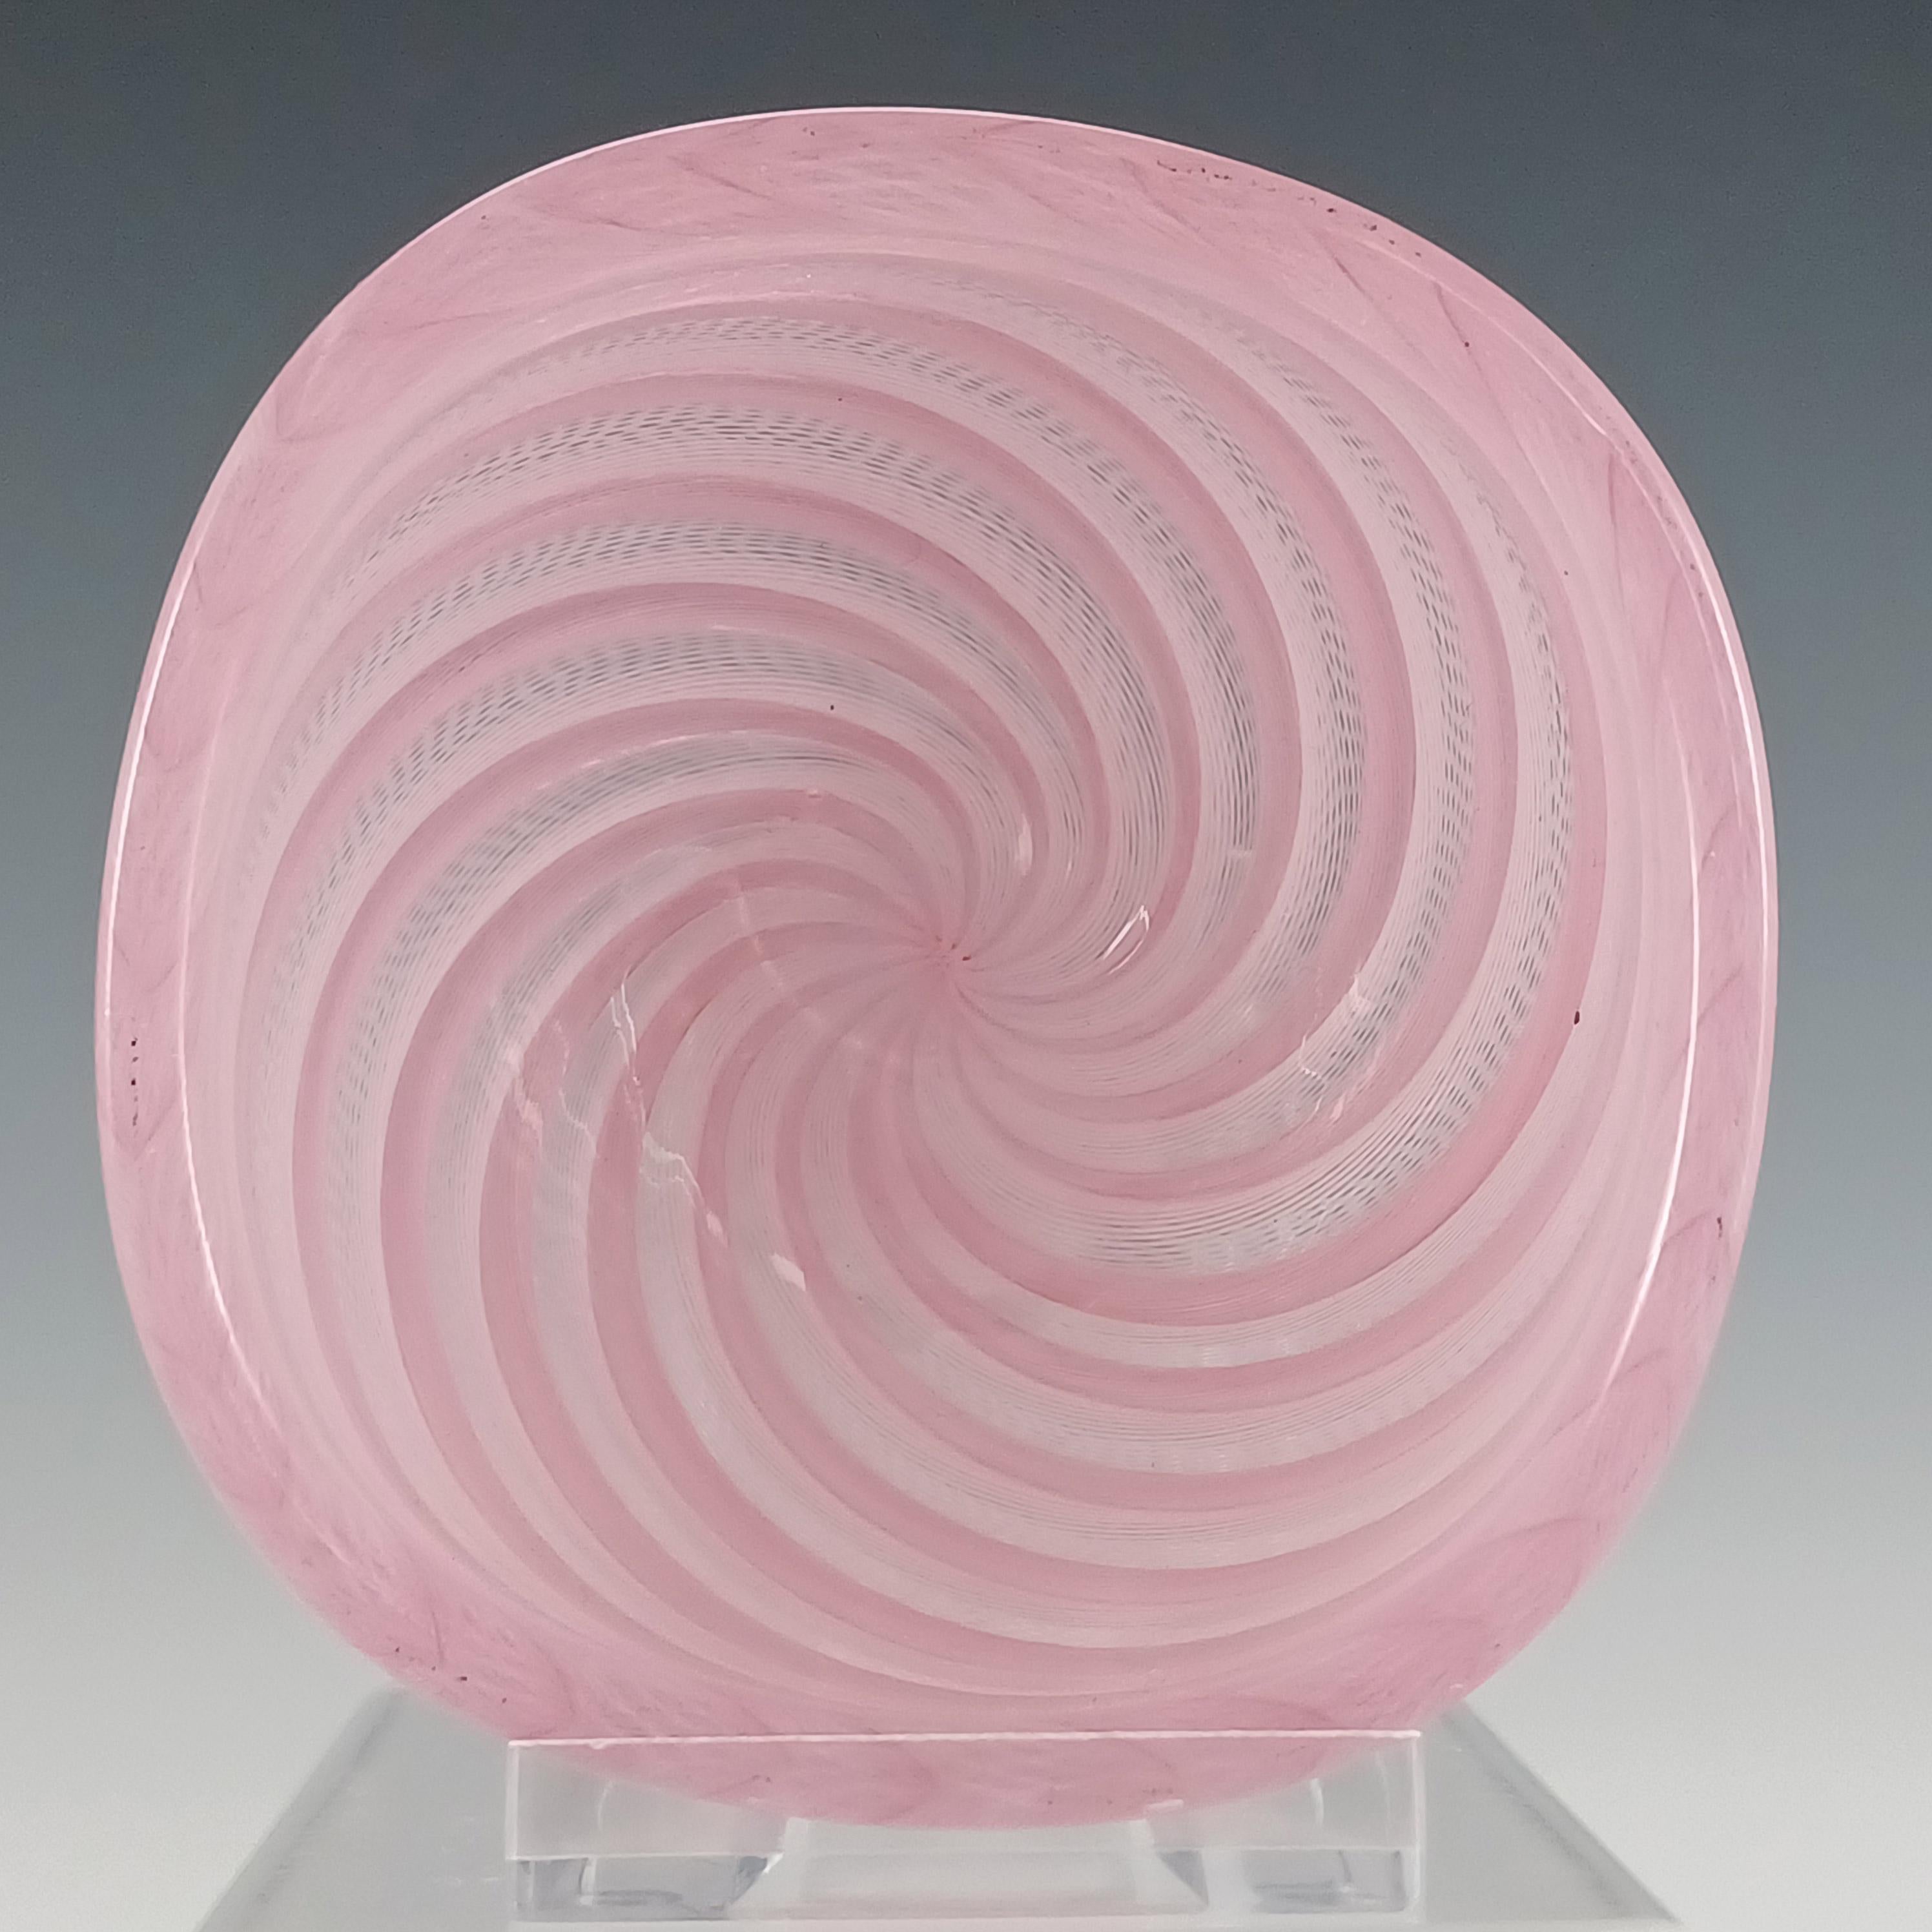 Here is an exquisite 1950's Venetian pink and white glass bowl, made with alternating stripes of lattice criss cross zanfirico filigree strands. Made on the island of Murano, near Venice, Italy, by famous manufacturers Venini. Bears their three line